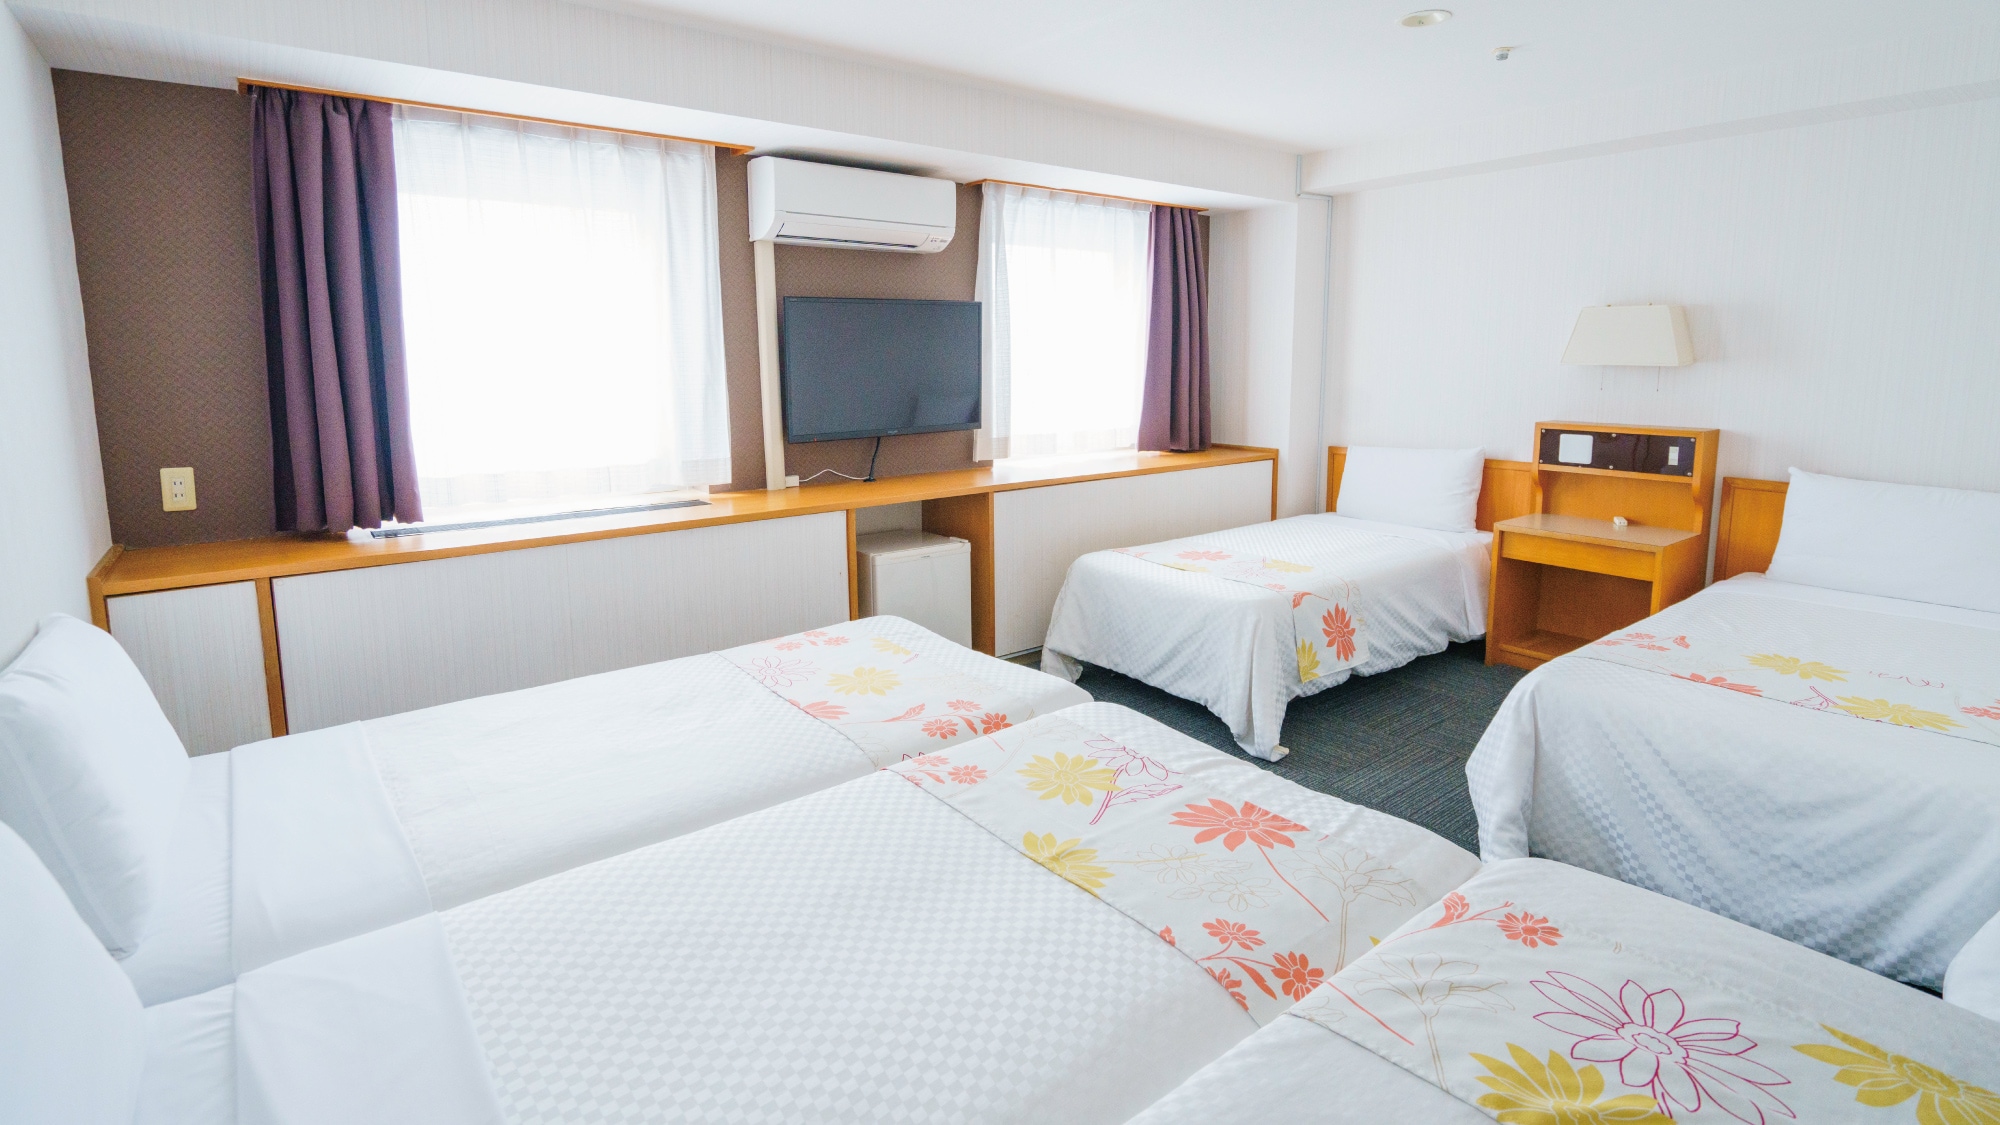 Up to 5 people can be accommodated with an extra bed!